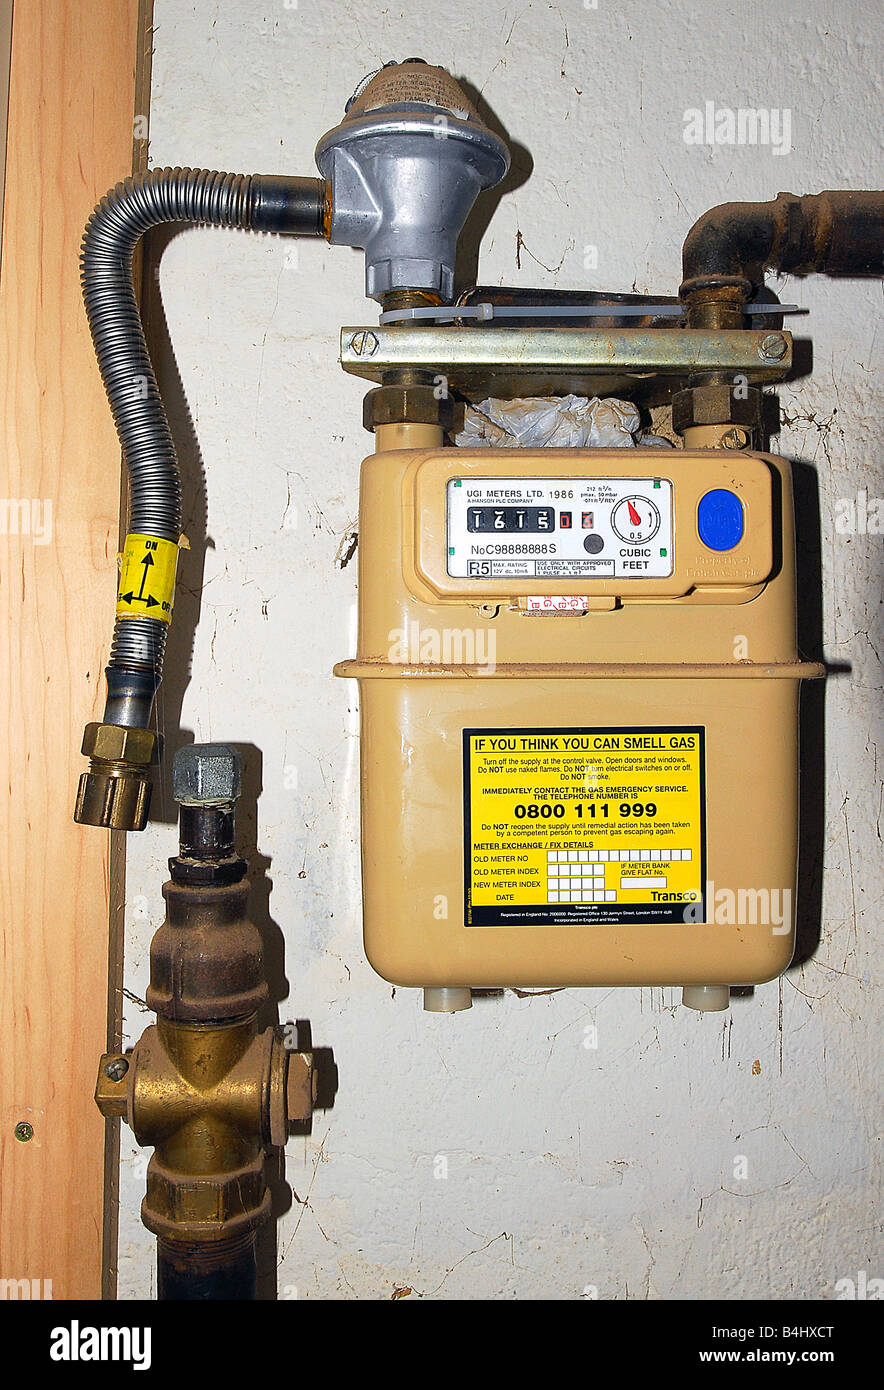 Disconnected gas meter on wall Stock Photo - Alamy